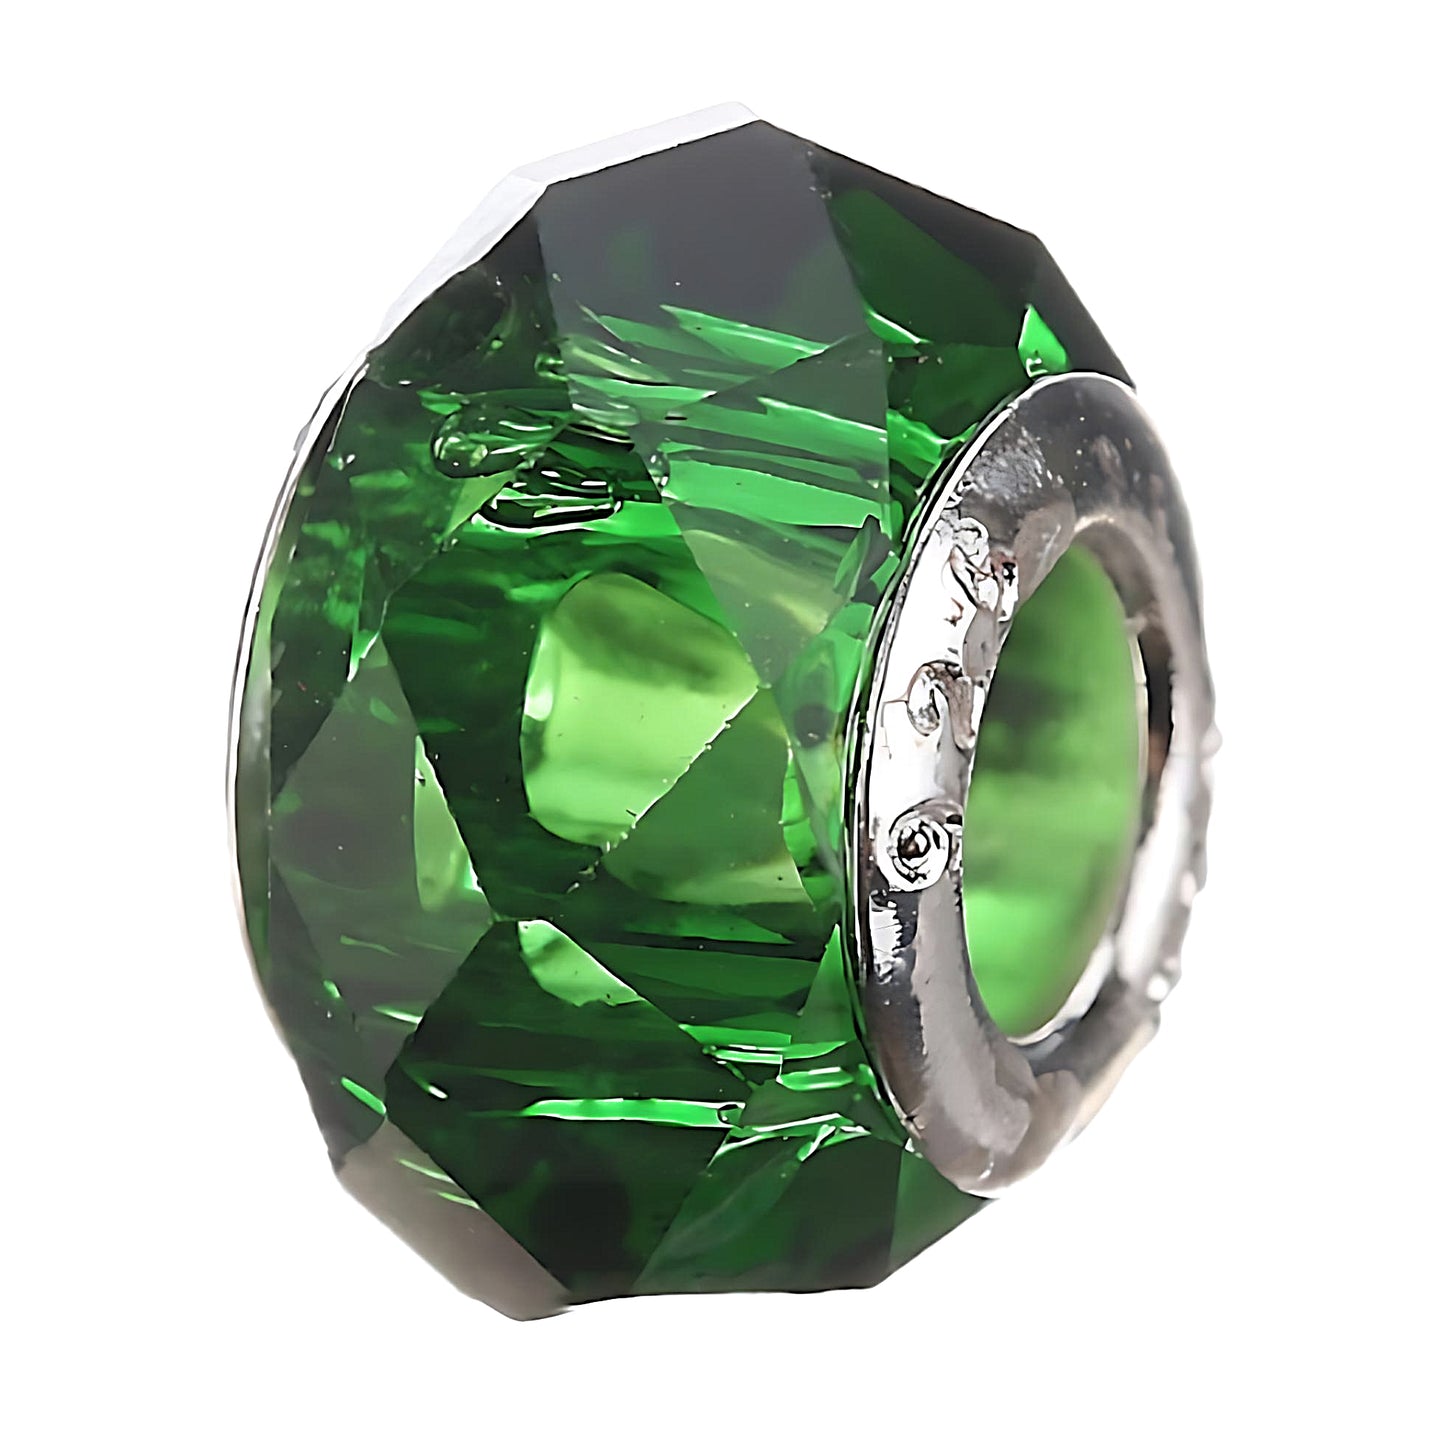 a faceted glass bead in green color